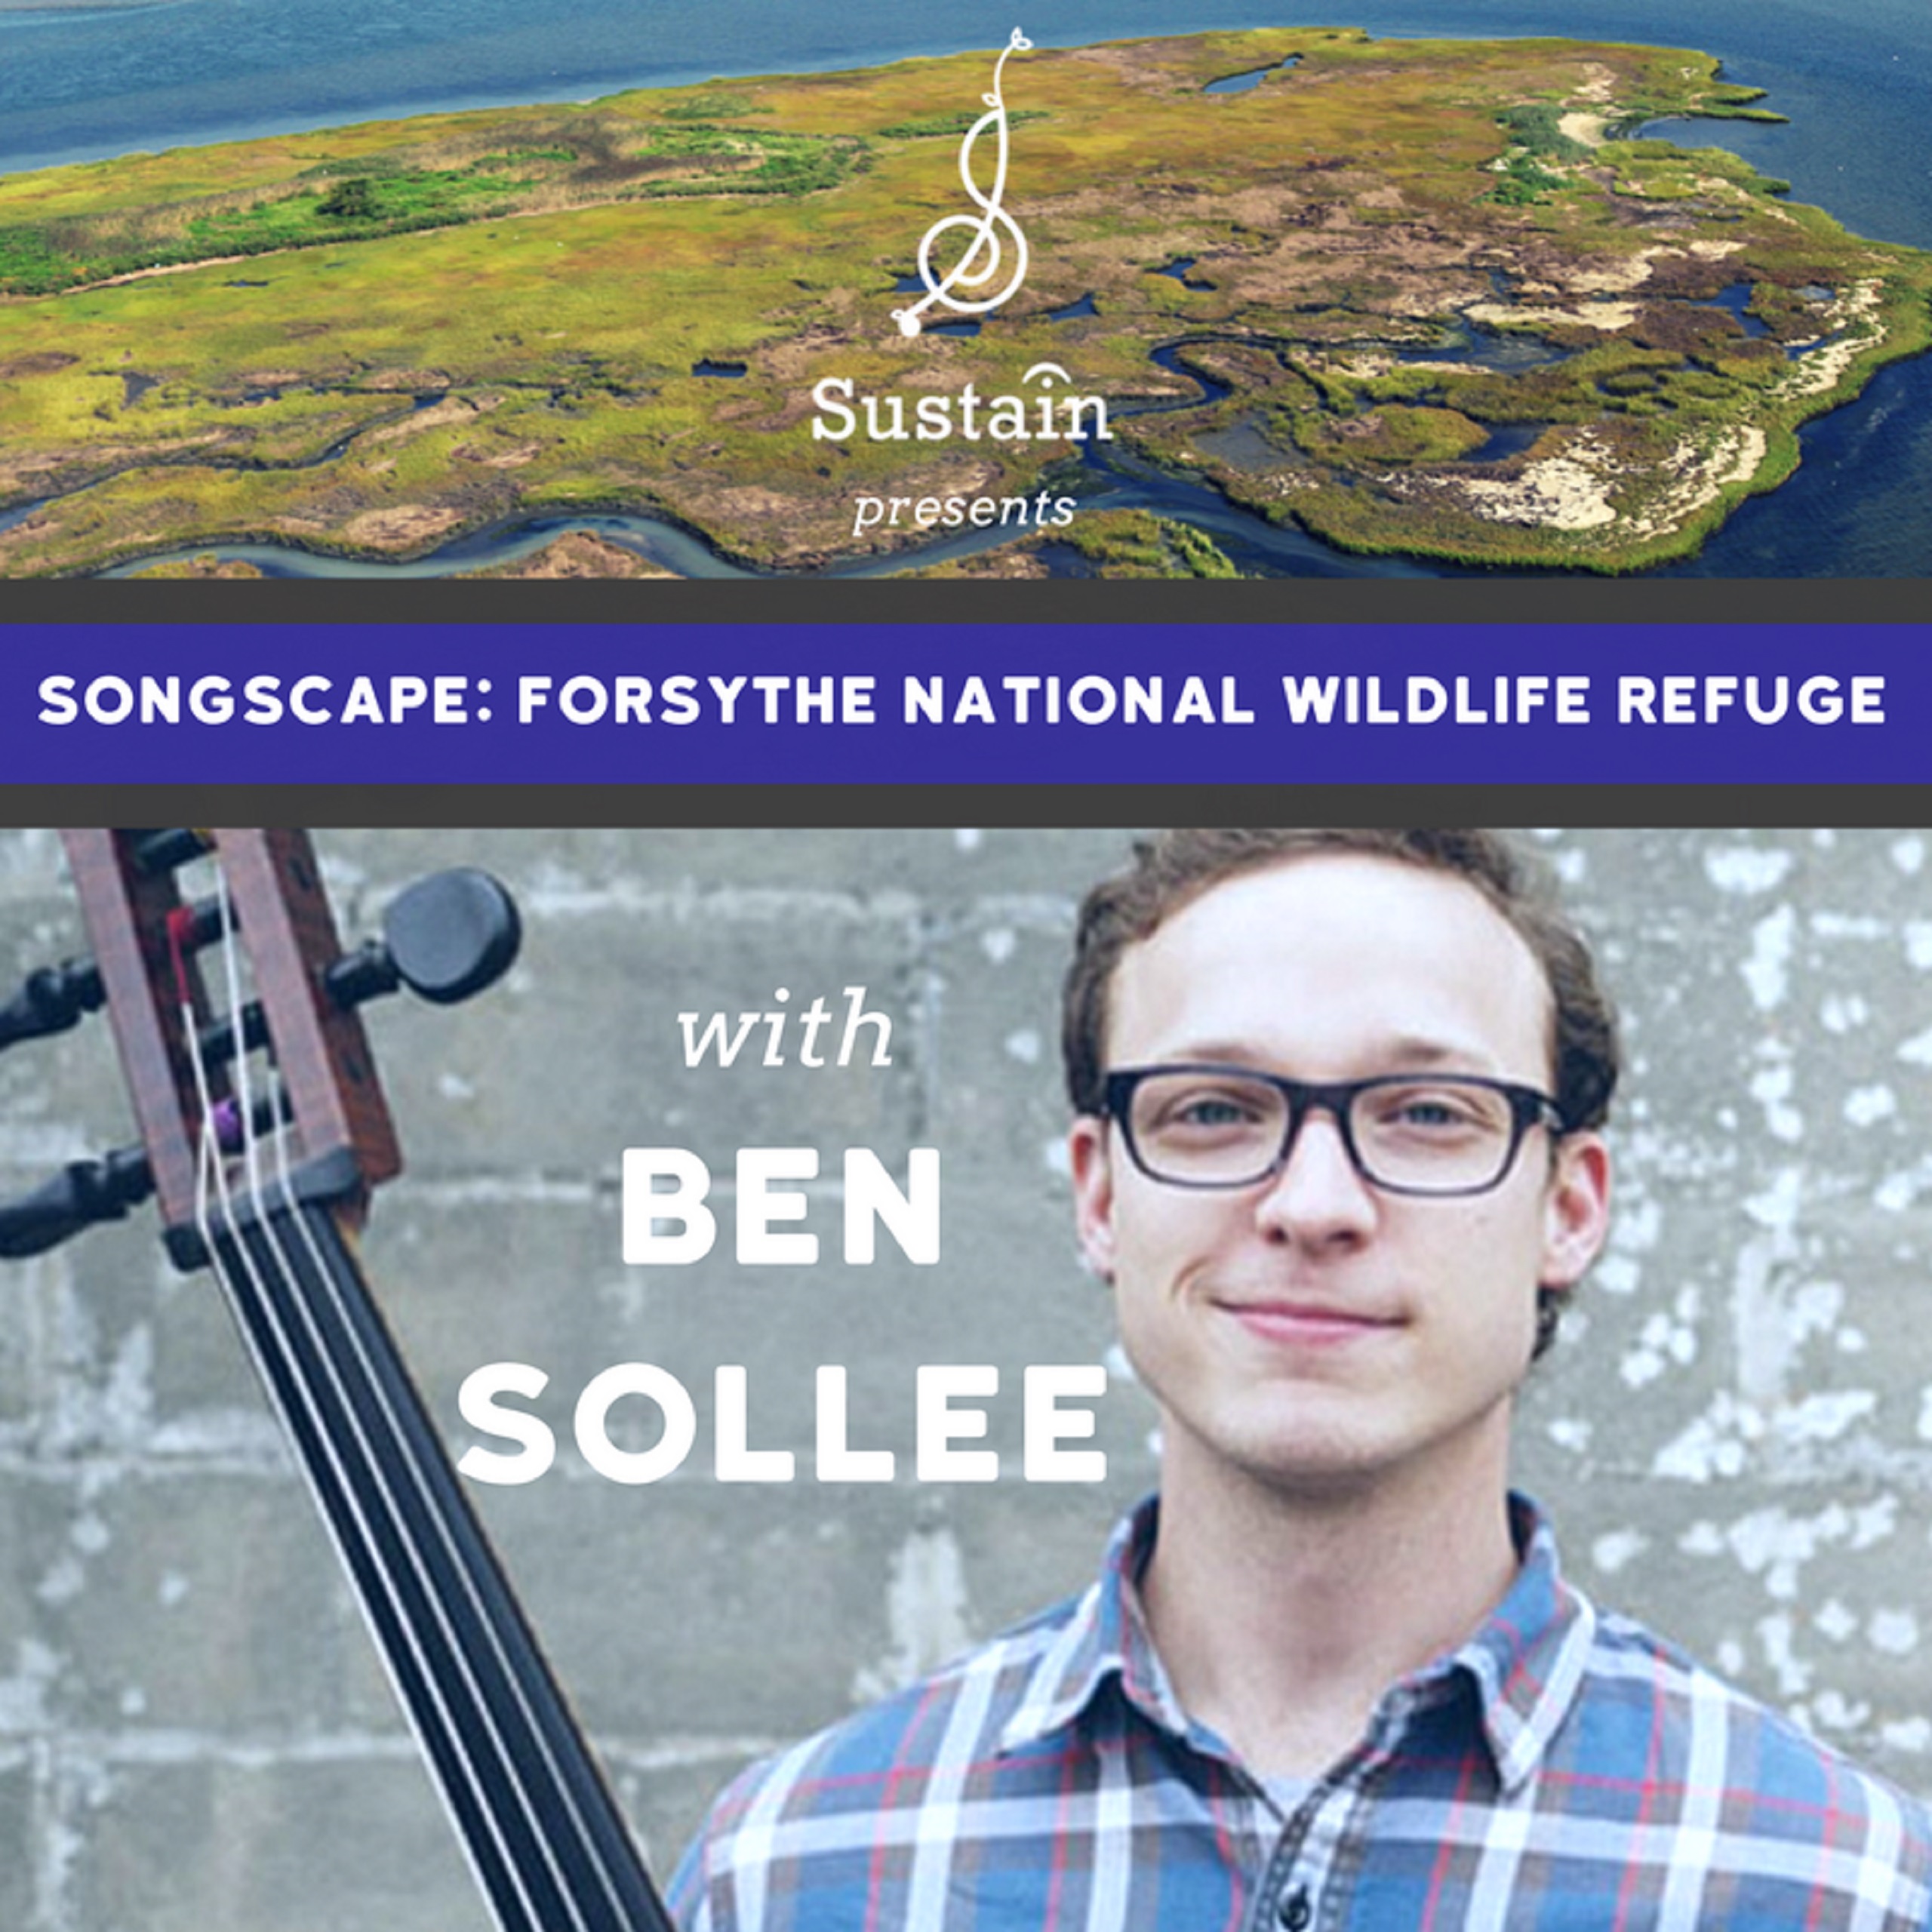 Ben Sollee Teams Up With US Fish & Wildlife Service to Make Music for Public Lands